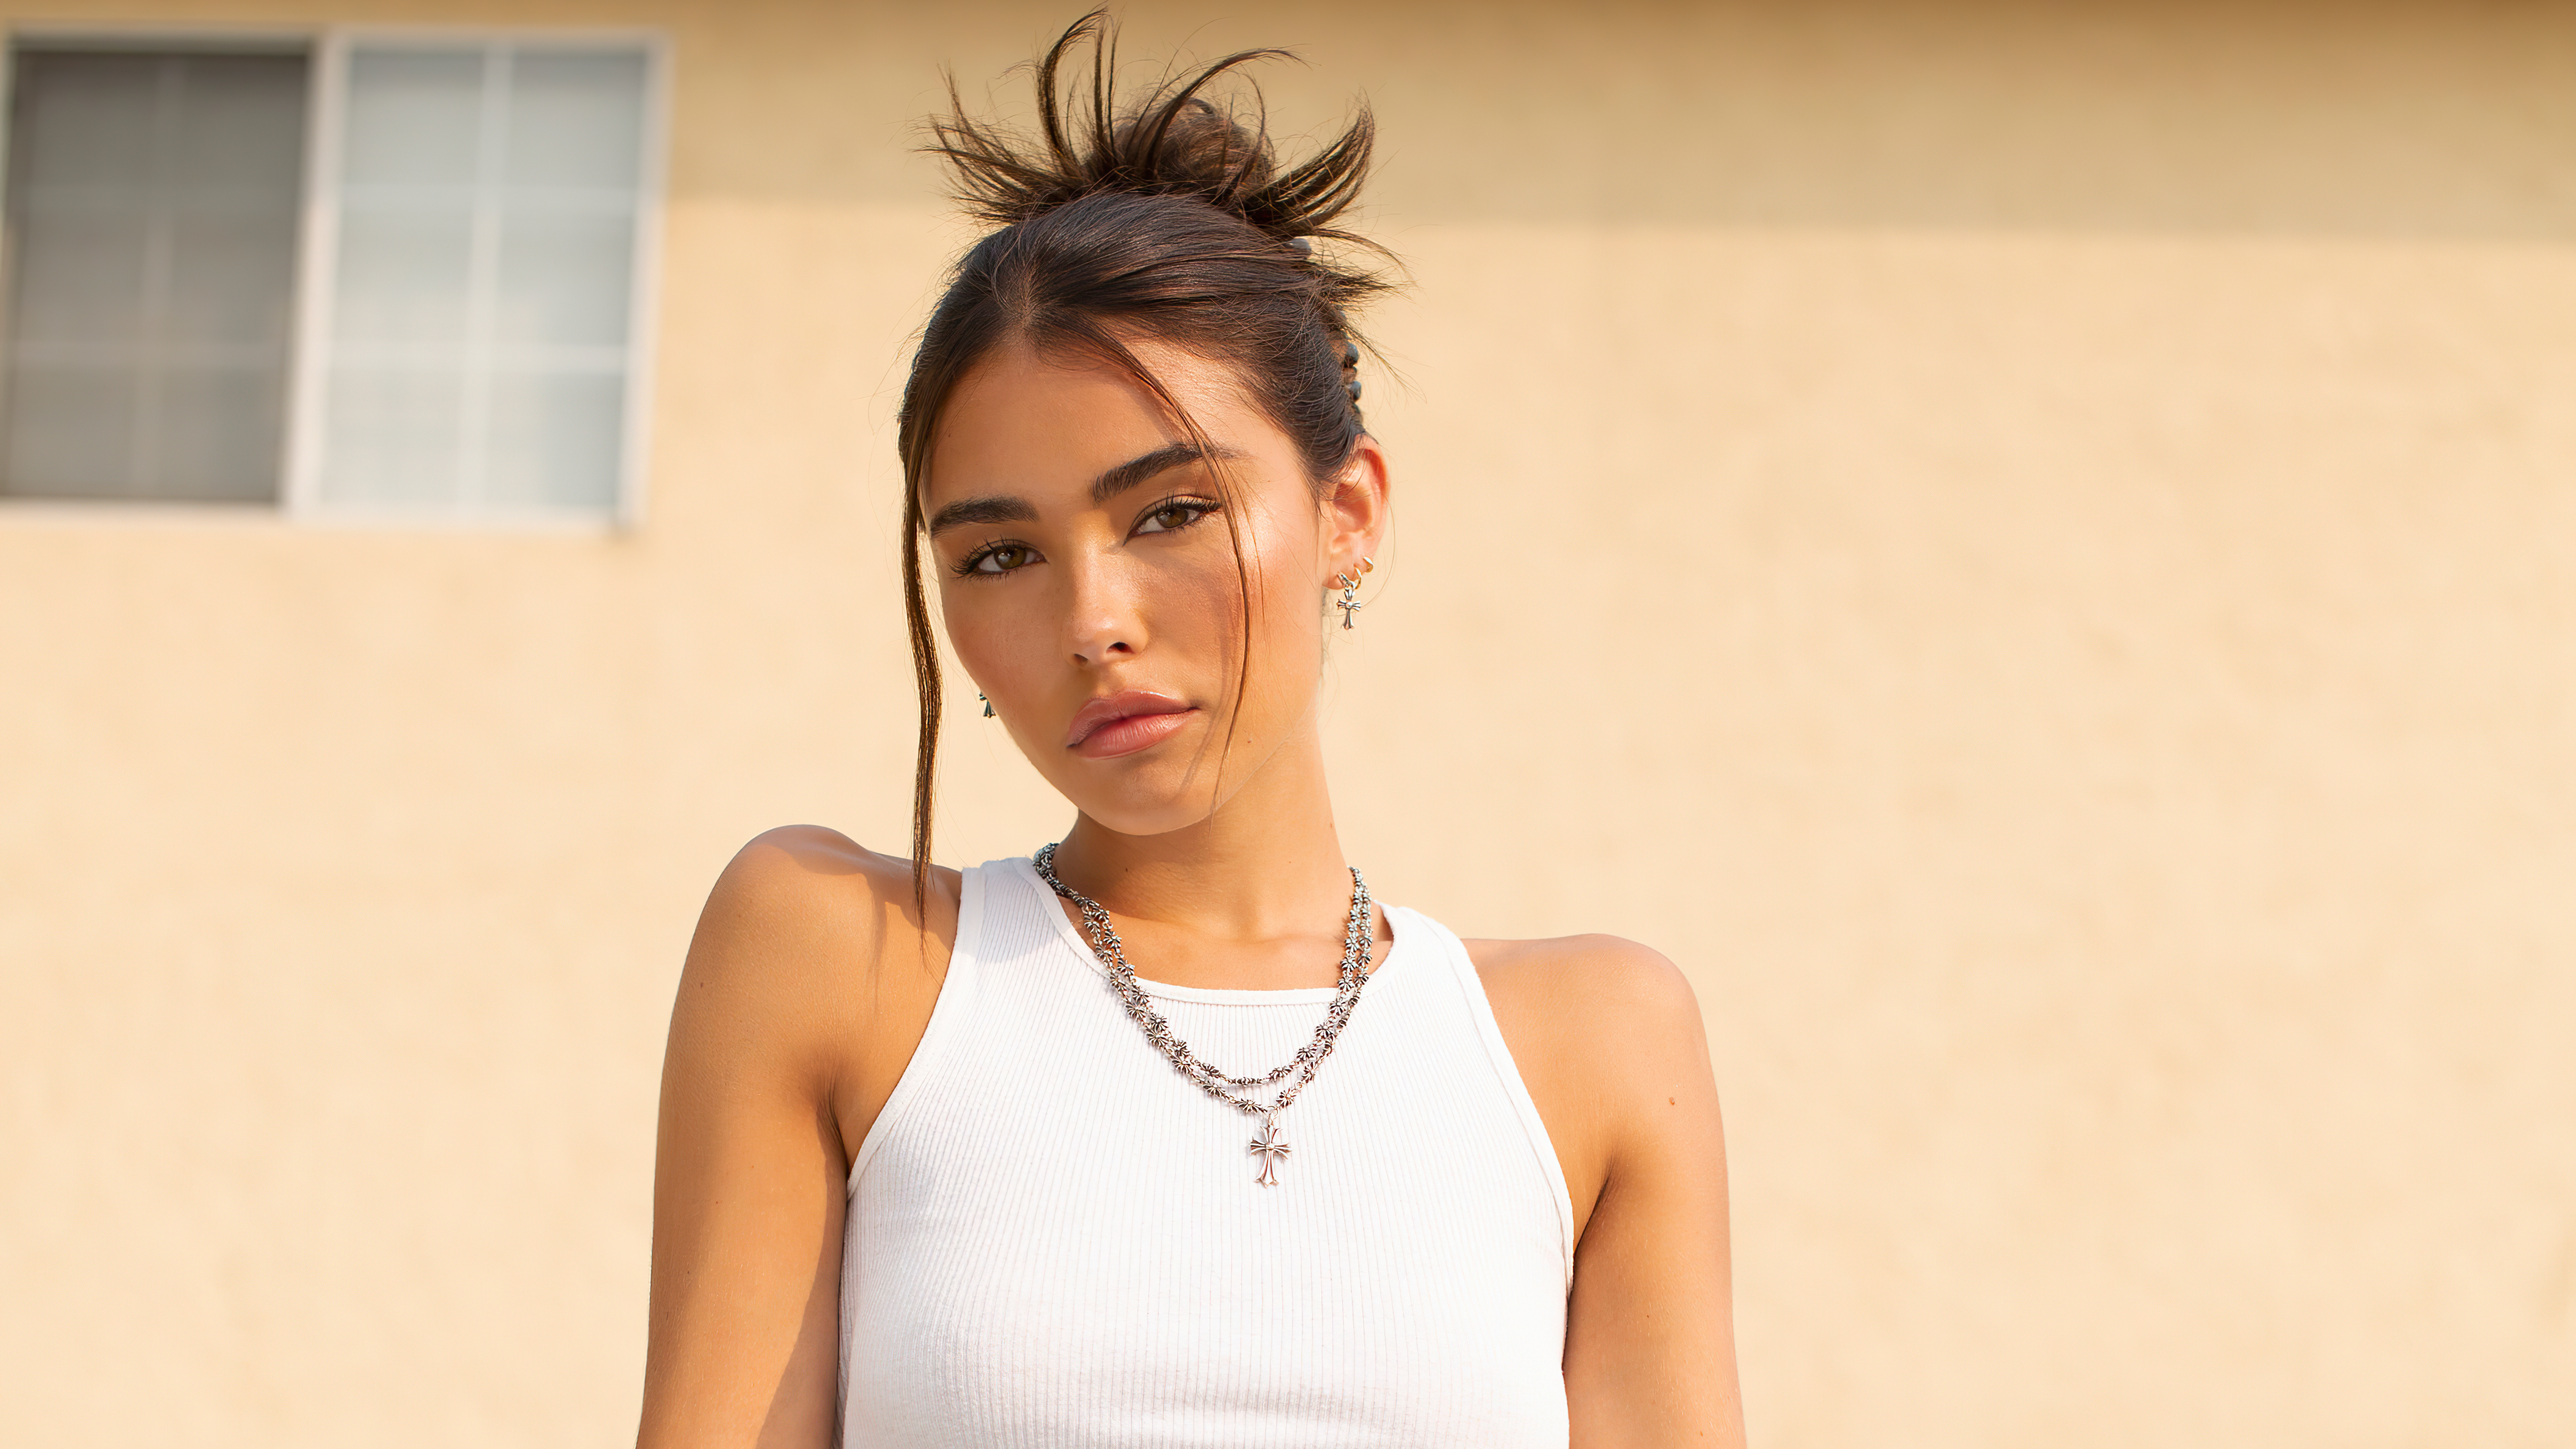 Madison Beer Singer Photoshoot Wallpapers